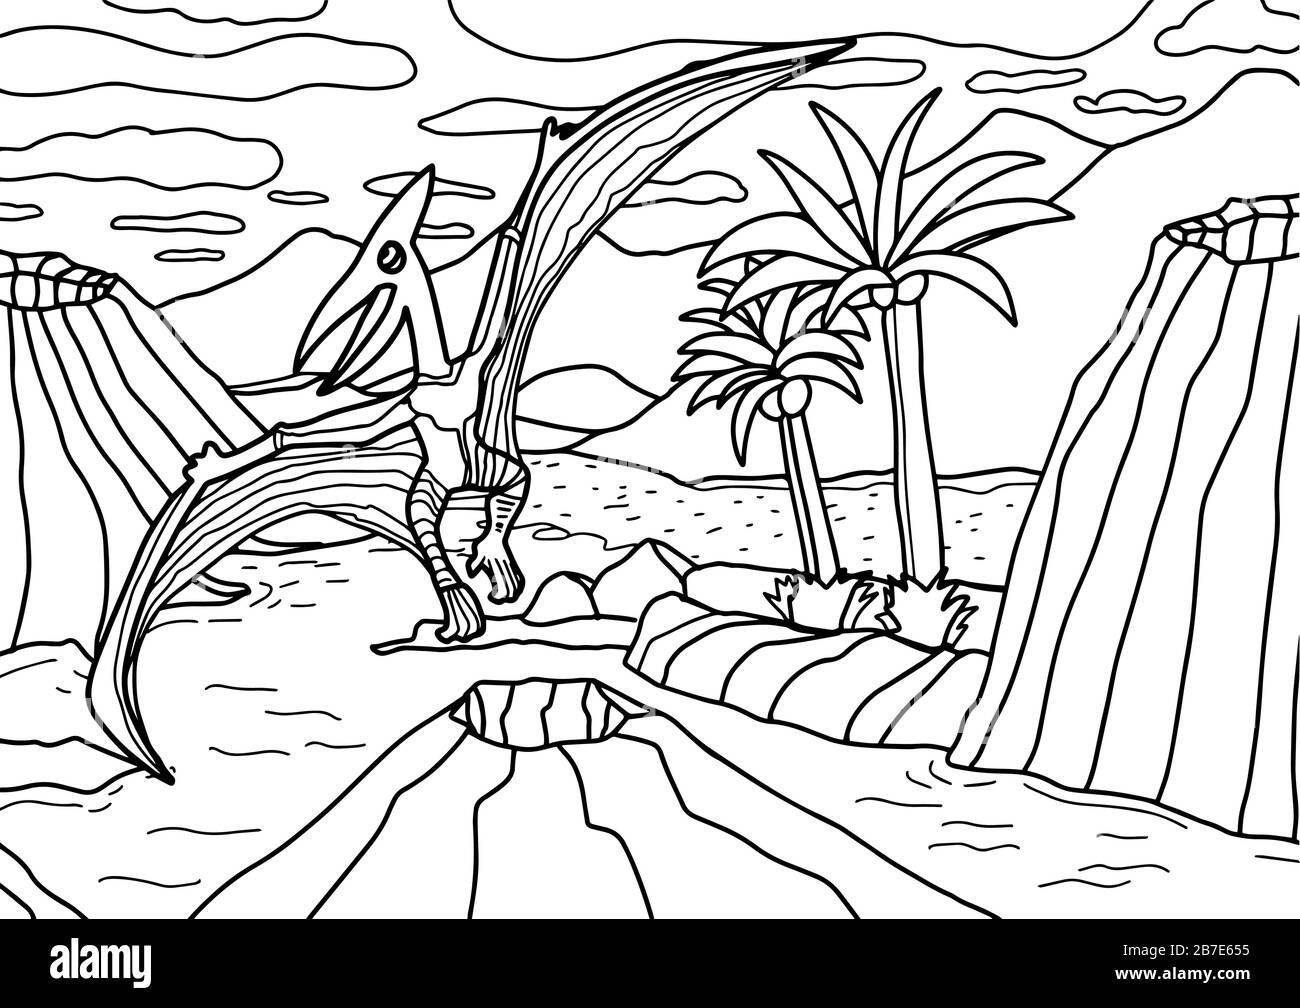 Jurassic World Pteranodon Coloring Page - itstime-togo